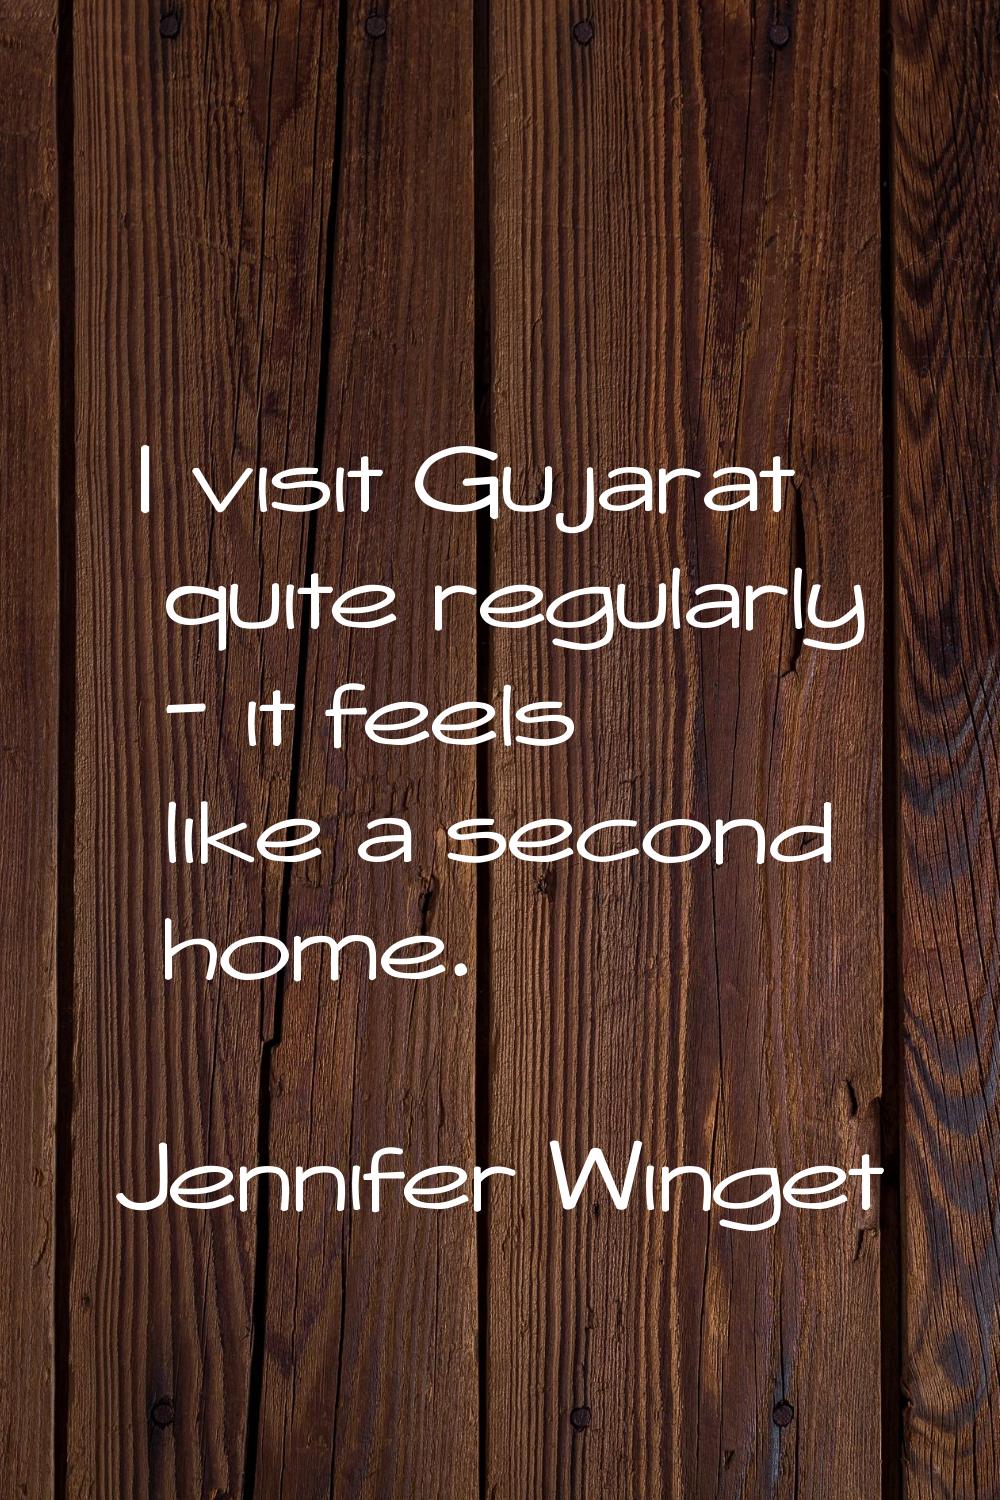 I visit Gujarat quite regularly - it feels like a second home.